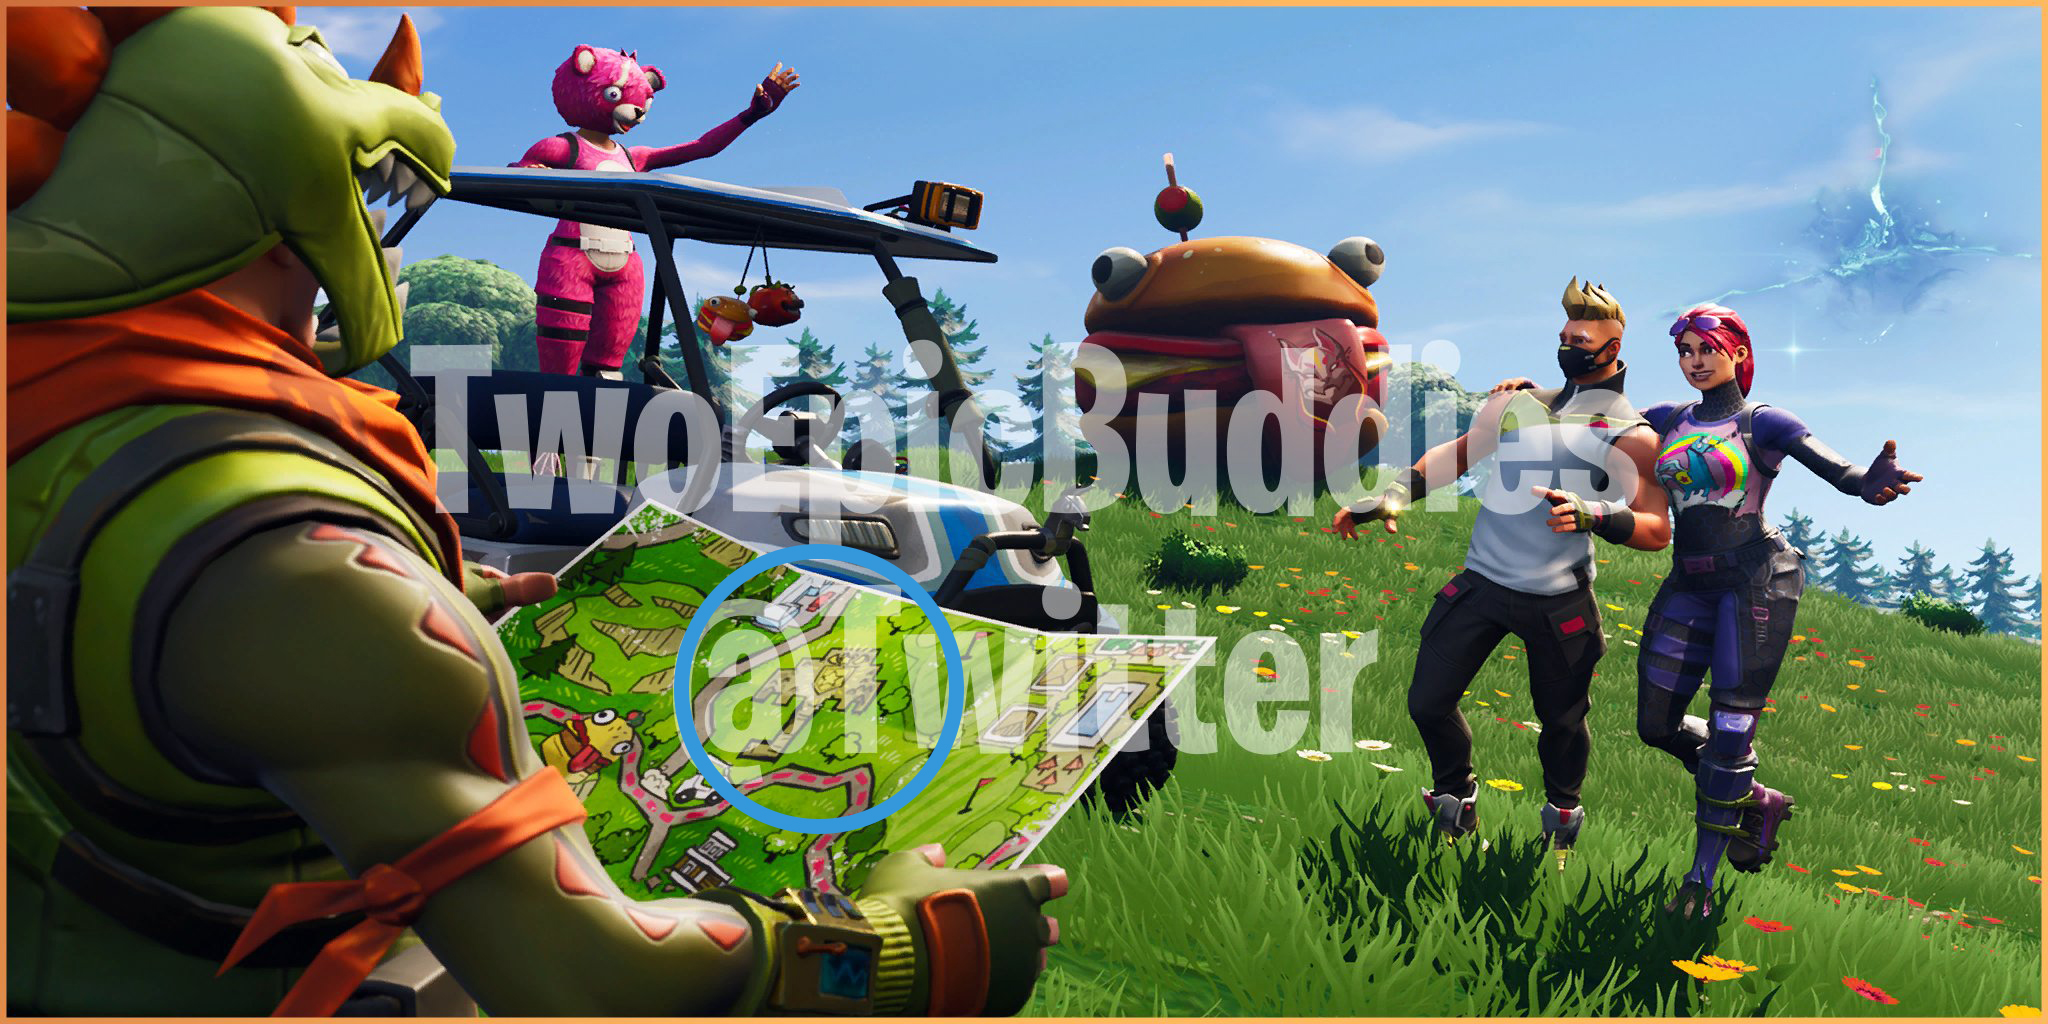 Fortnite Season 5 Hidden Battle Stars Locations Road Trip - the hidden battle star is depicted at the mining area that is west of the new lazy links location formerly anarchy acres